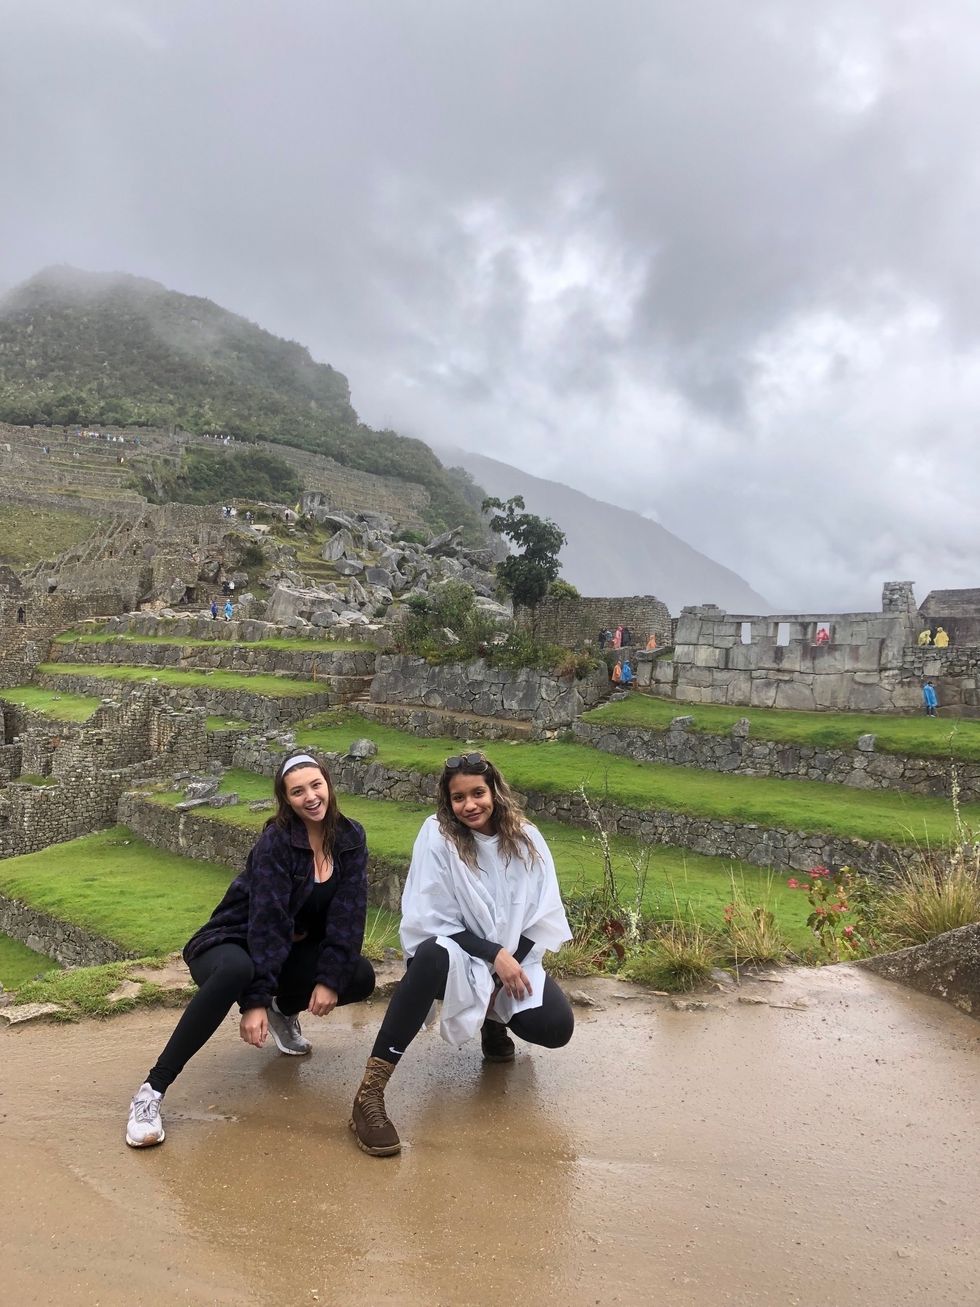 5 Things You Need To Know Before Traveling To Machu Picchu